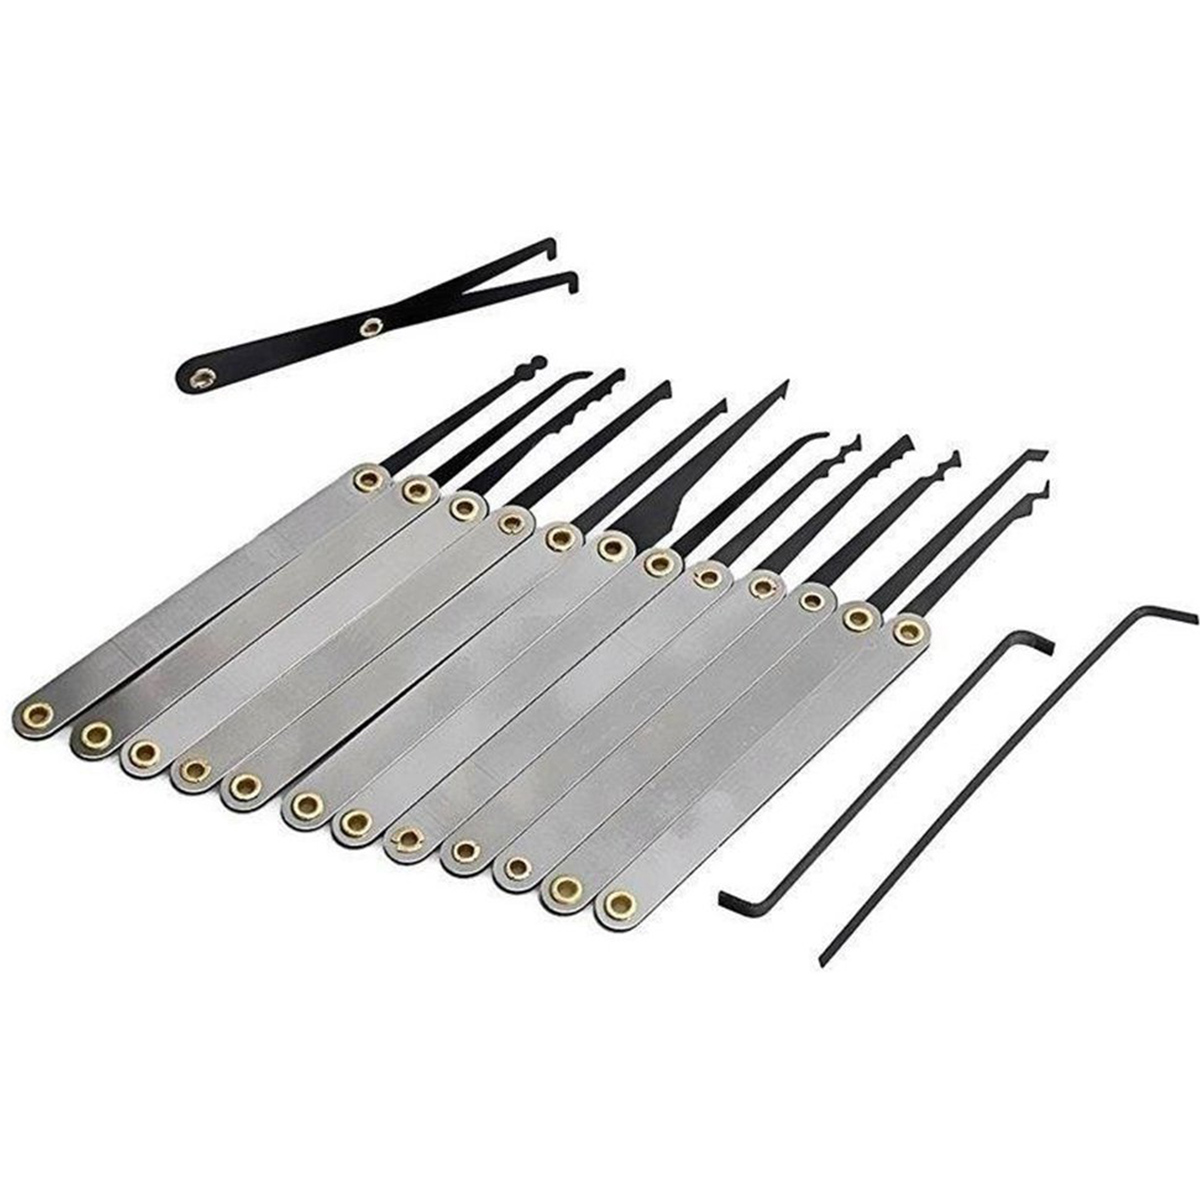 Find Padlock Pick Set For Locksmith Training 38/24/17/15/11/5pcs Lock Pick Practice Tools Hooks Set for Sale on Gipsybee.com with cryptocurrencies